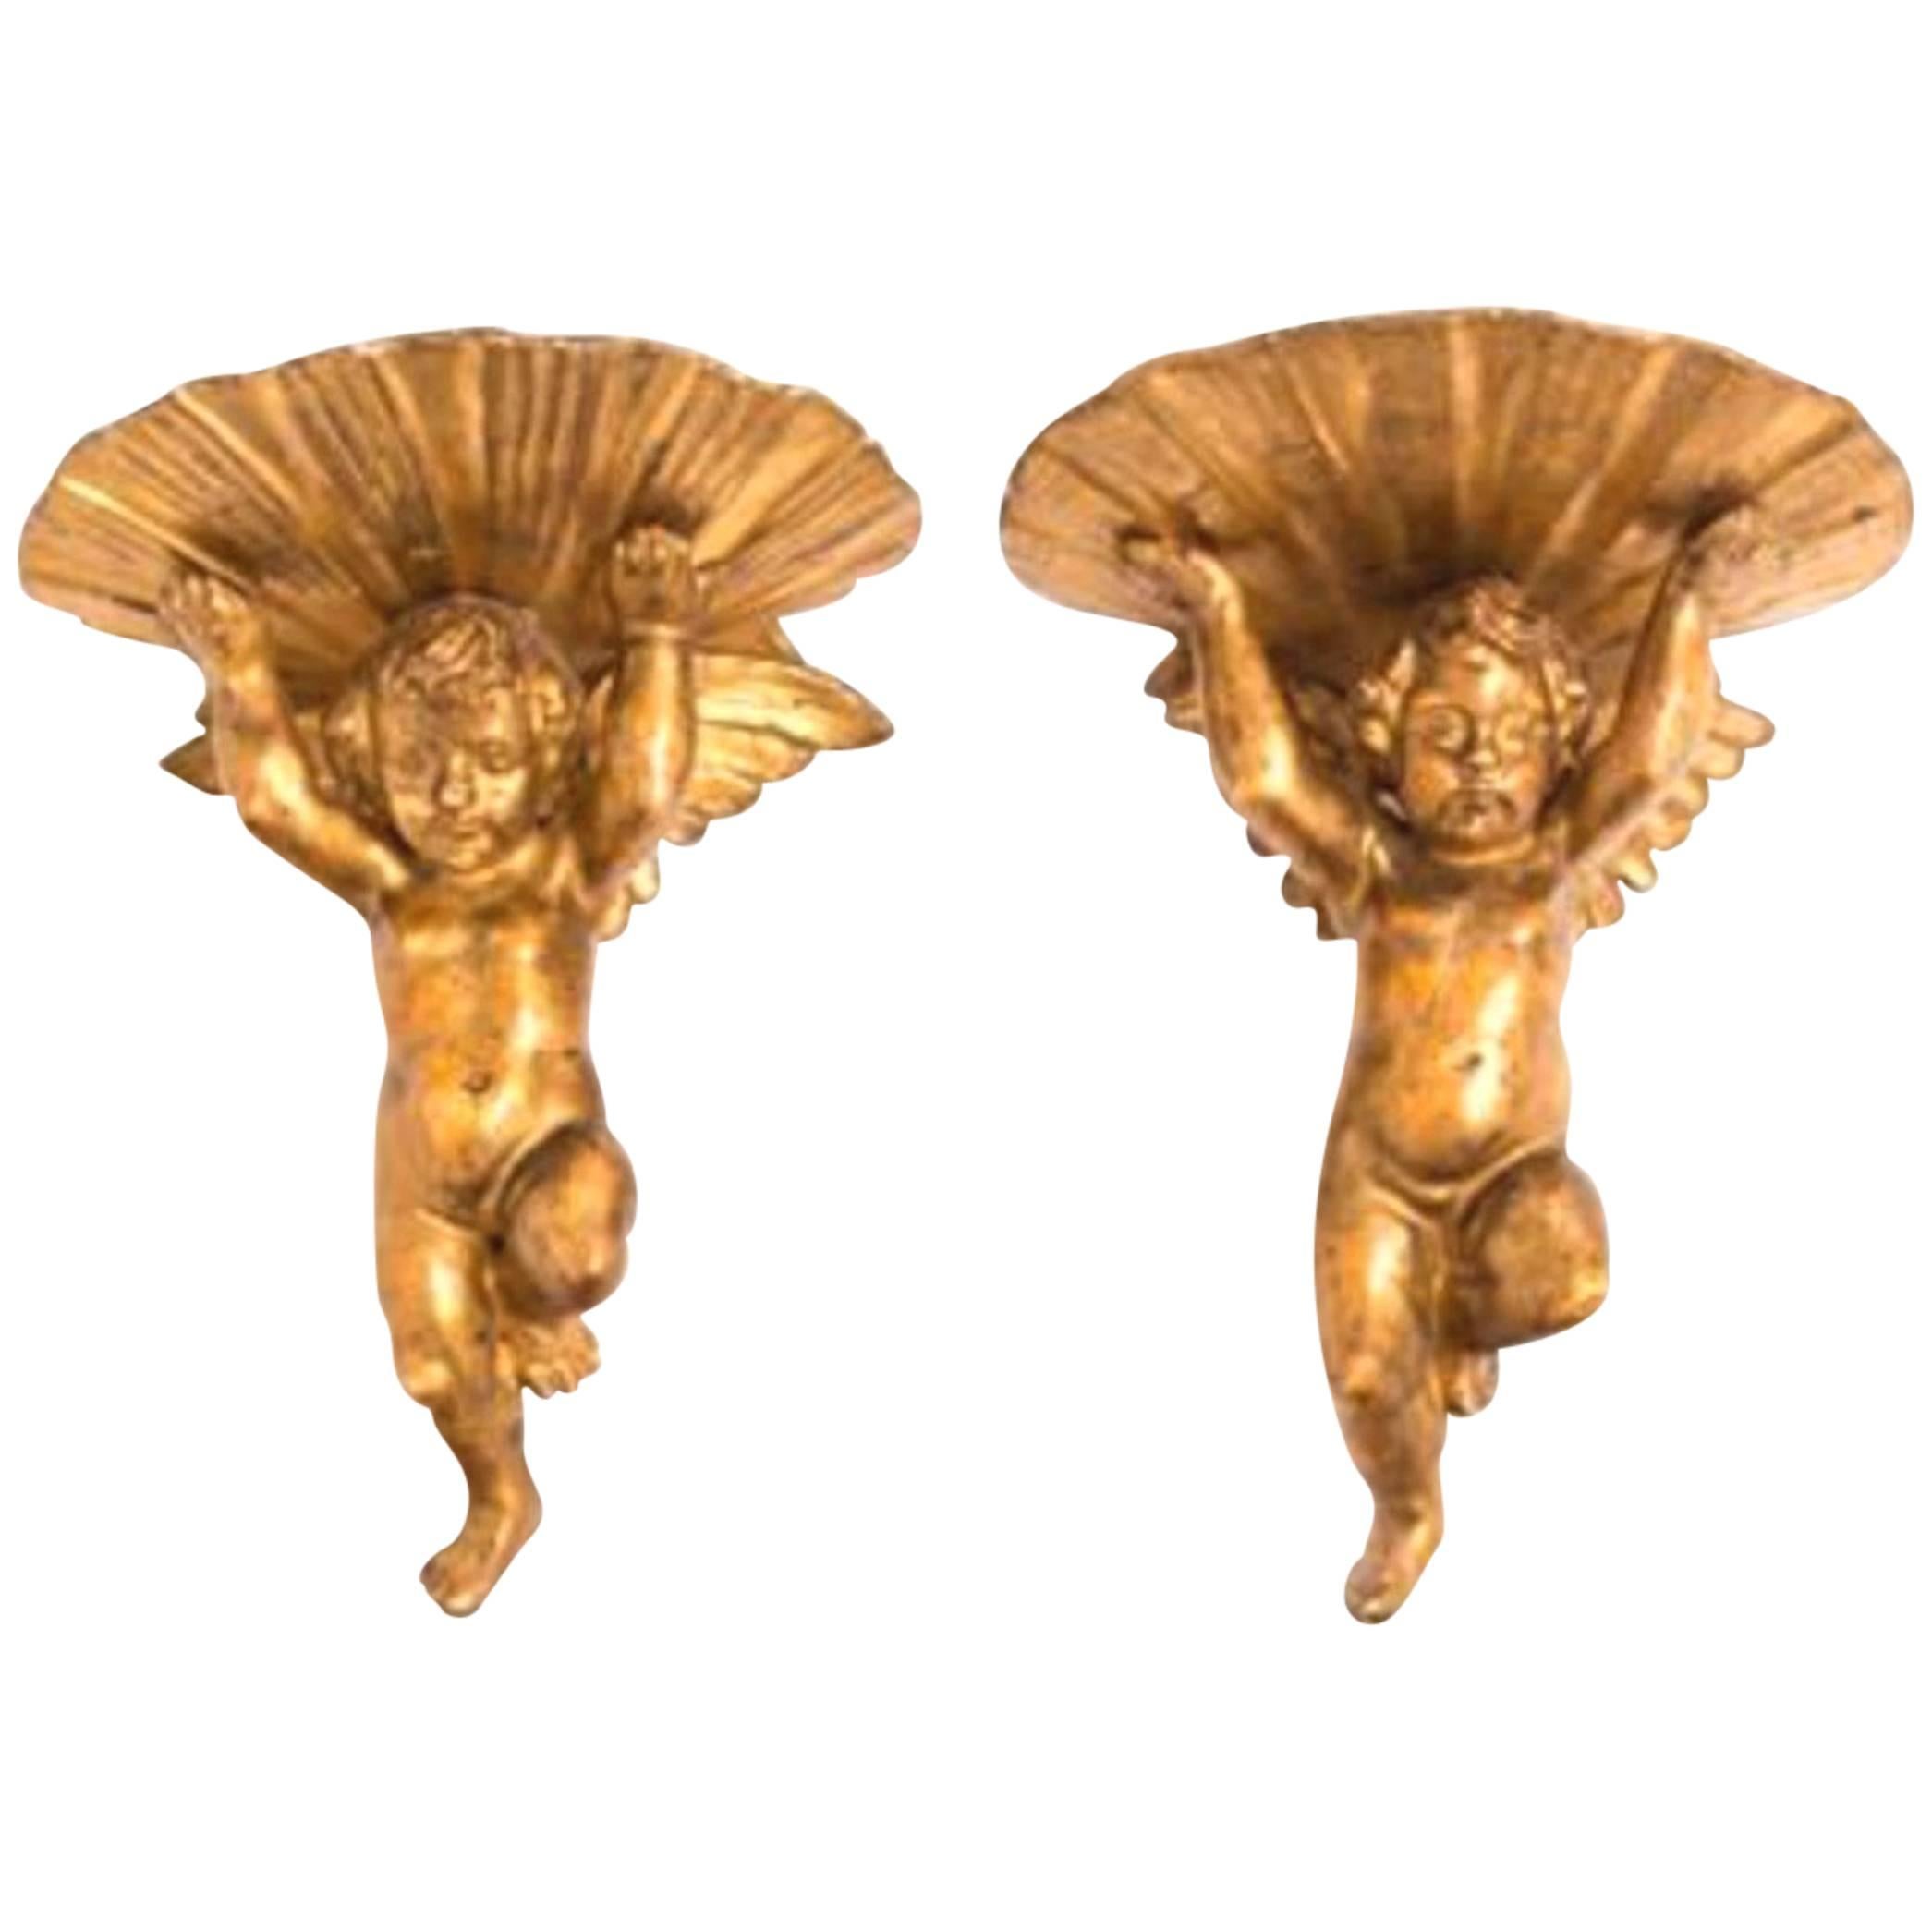 Charming Pair of 19th Century Italian Giltwood Brackets, Putti Supporting Shell